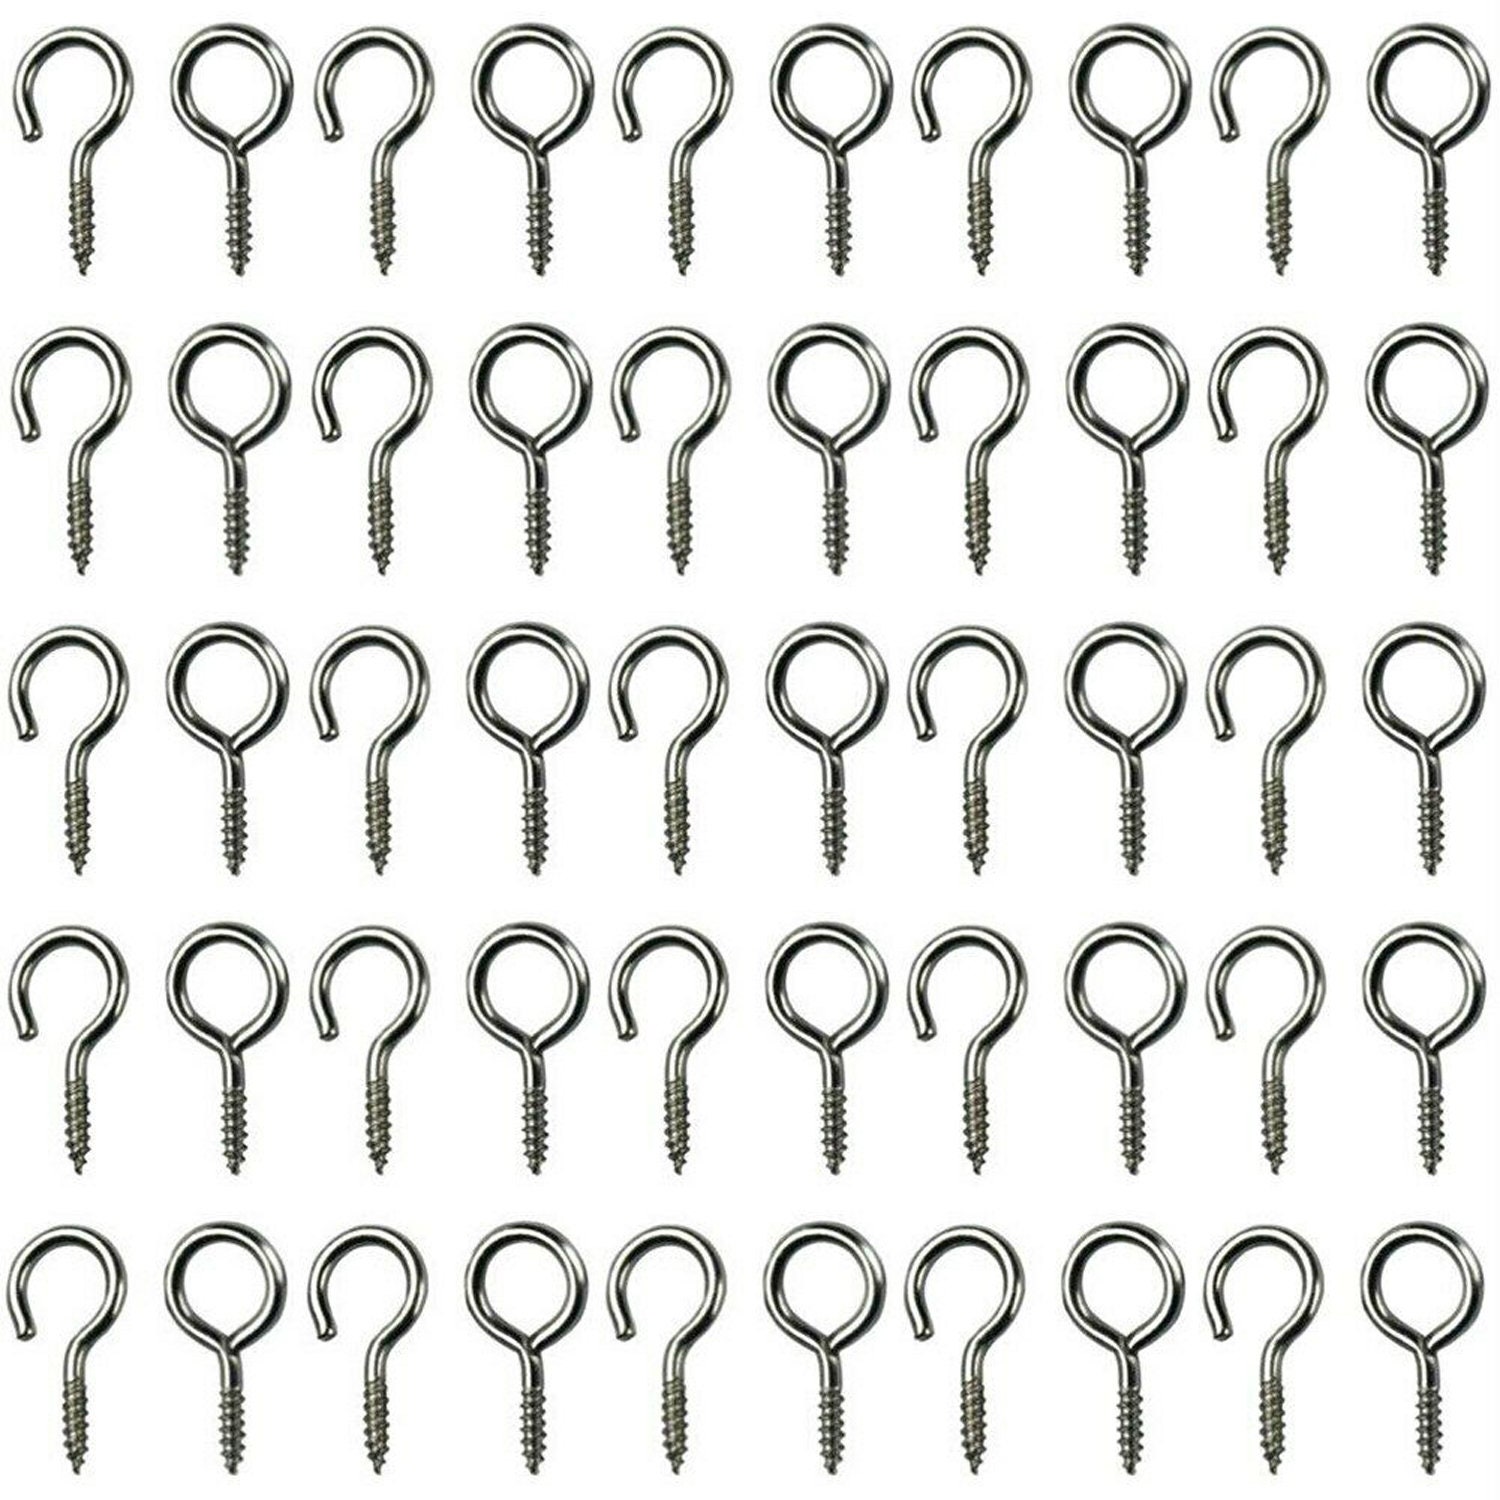 Hooks and Eyes for Net Curtain wire silver Metal Chrome Screws Hook & Eye Voile 